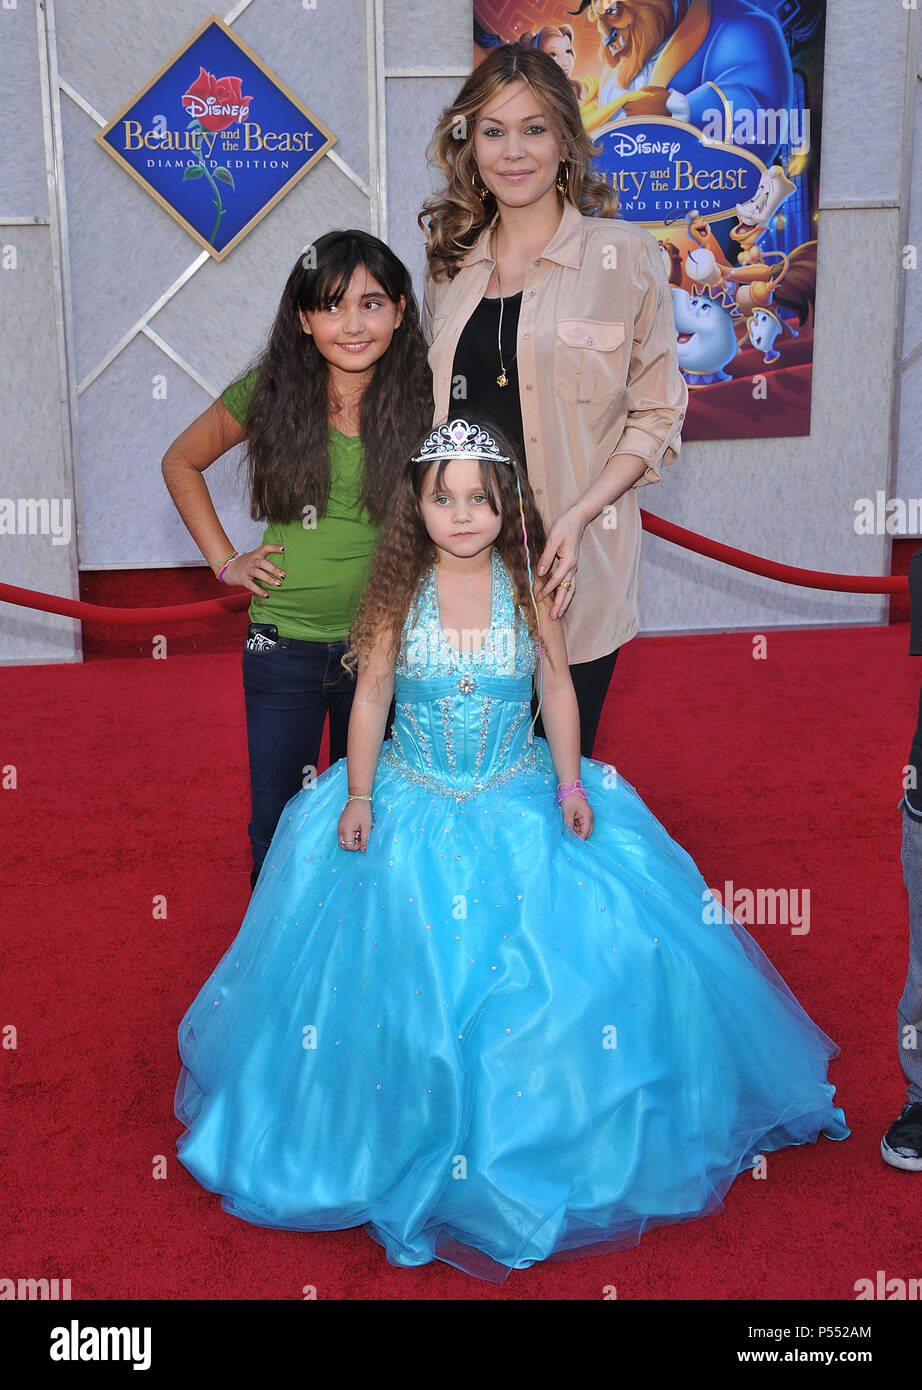 Shanna Moekler with dauhgters and son The Beauty and The Beast DVD / Blue Ray release at El Capitan Theatre In Los Angeles.Shanna Moakler kids 31  Event in Hollywood Life - California, Red Carpet Event, USA, Film Industry, Celebrities, Photography, Bestof, Arts Culture and Entertainment, Celebrities fashion, Best of, Hollywood Life, Event in Hollywood Life - California, Red Carpet and backstage, Music celebrities, Topix, Couple, family ( husband and wife ) and kids- Children, brothers and sisters inquiry tsuni@Gamma-USA.com, Credit Tsuni / USA, 2010 Stock Photo